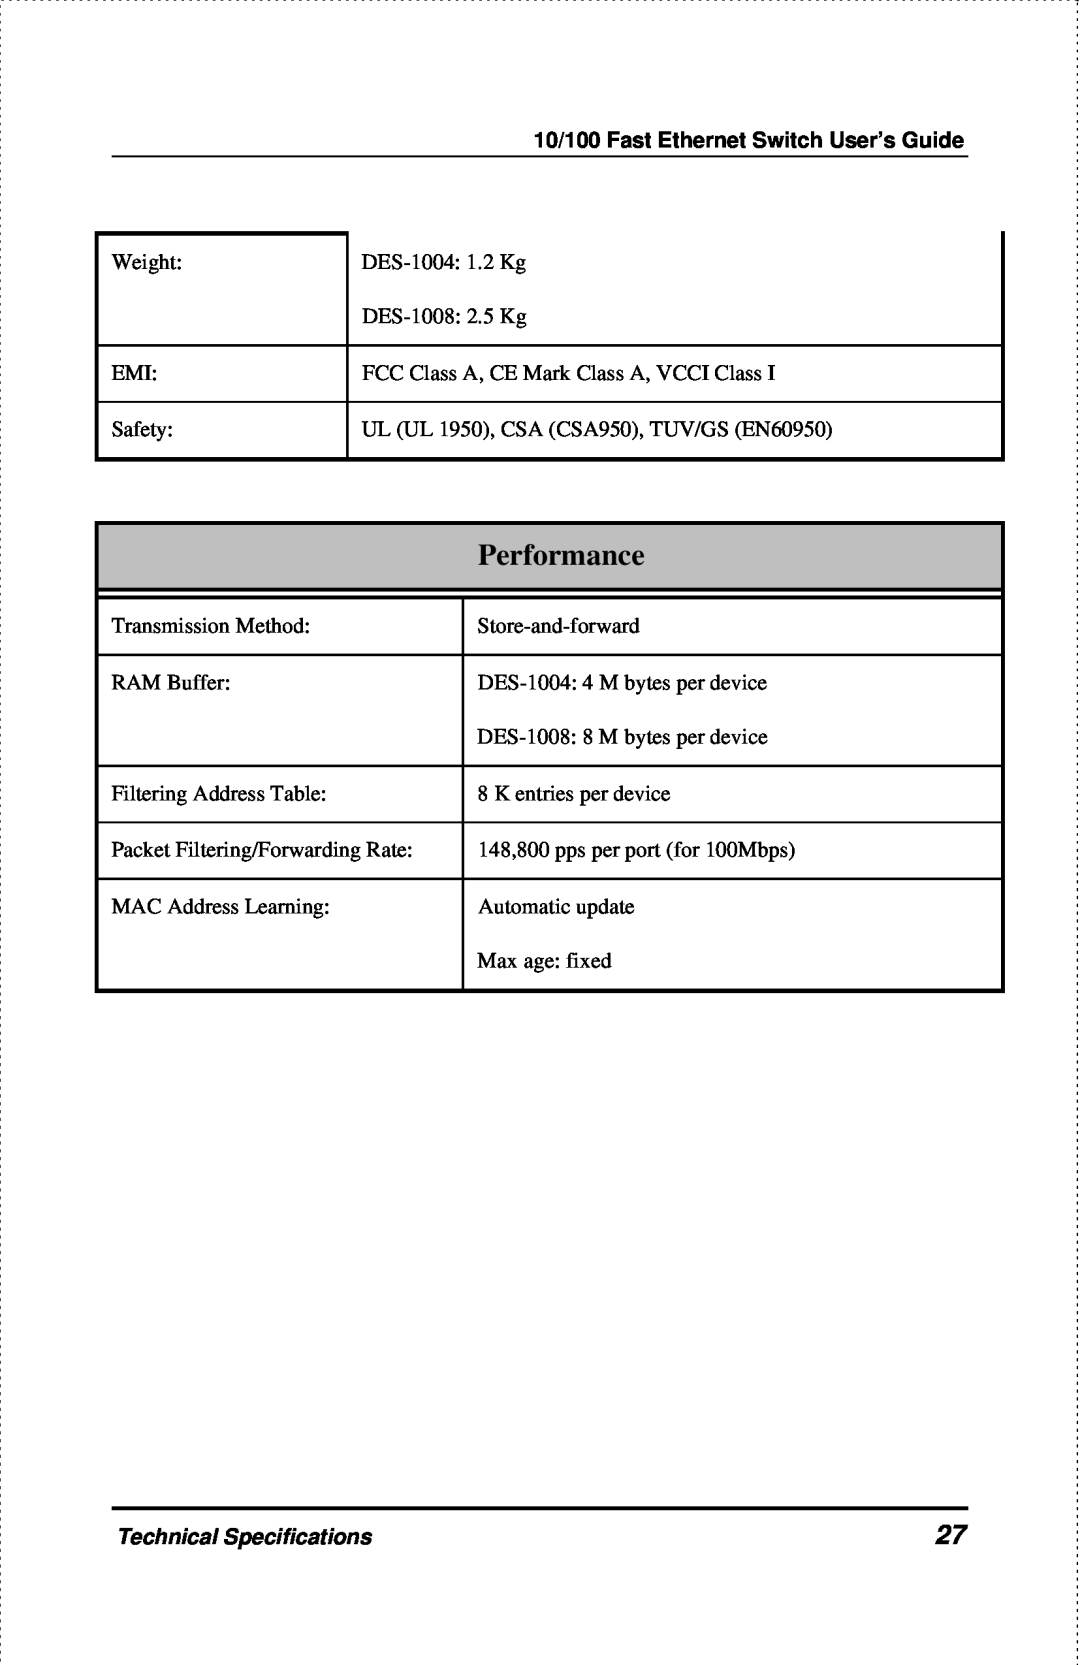 D-Link DES-1004 manual Performance, Technical Specifications 